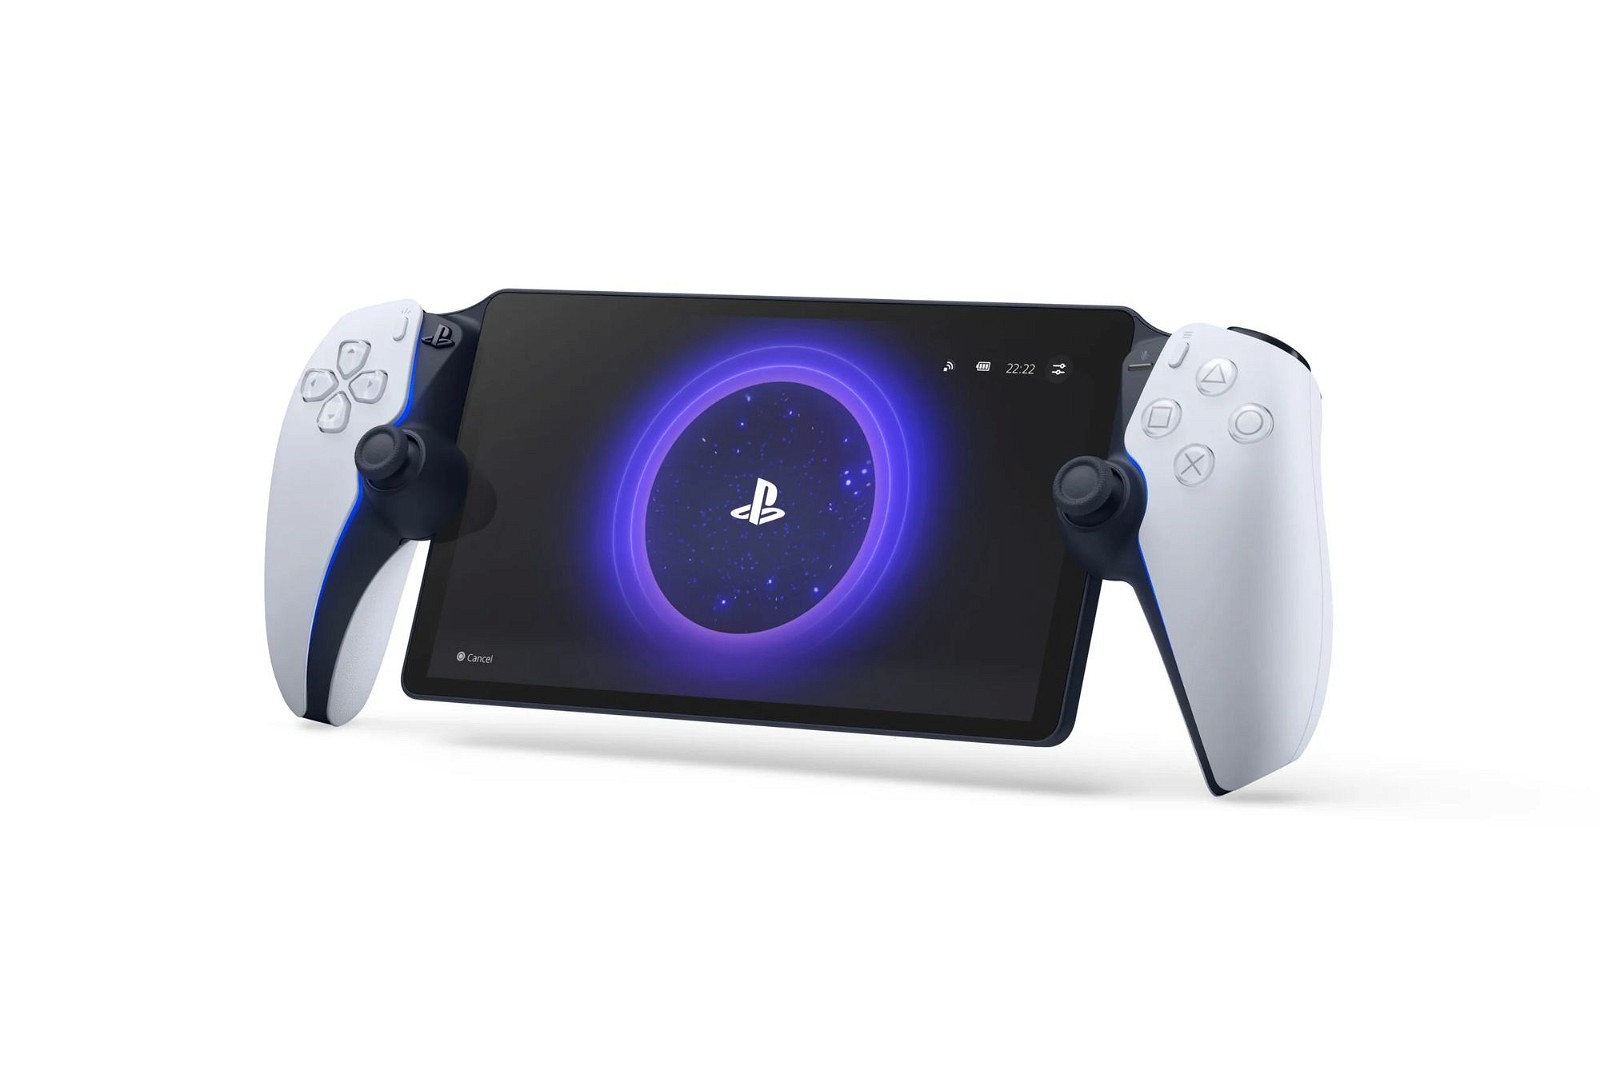 Sony's new PlayStation Portal is coming out this Fall, on the 15th of November